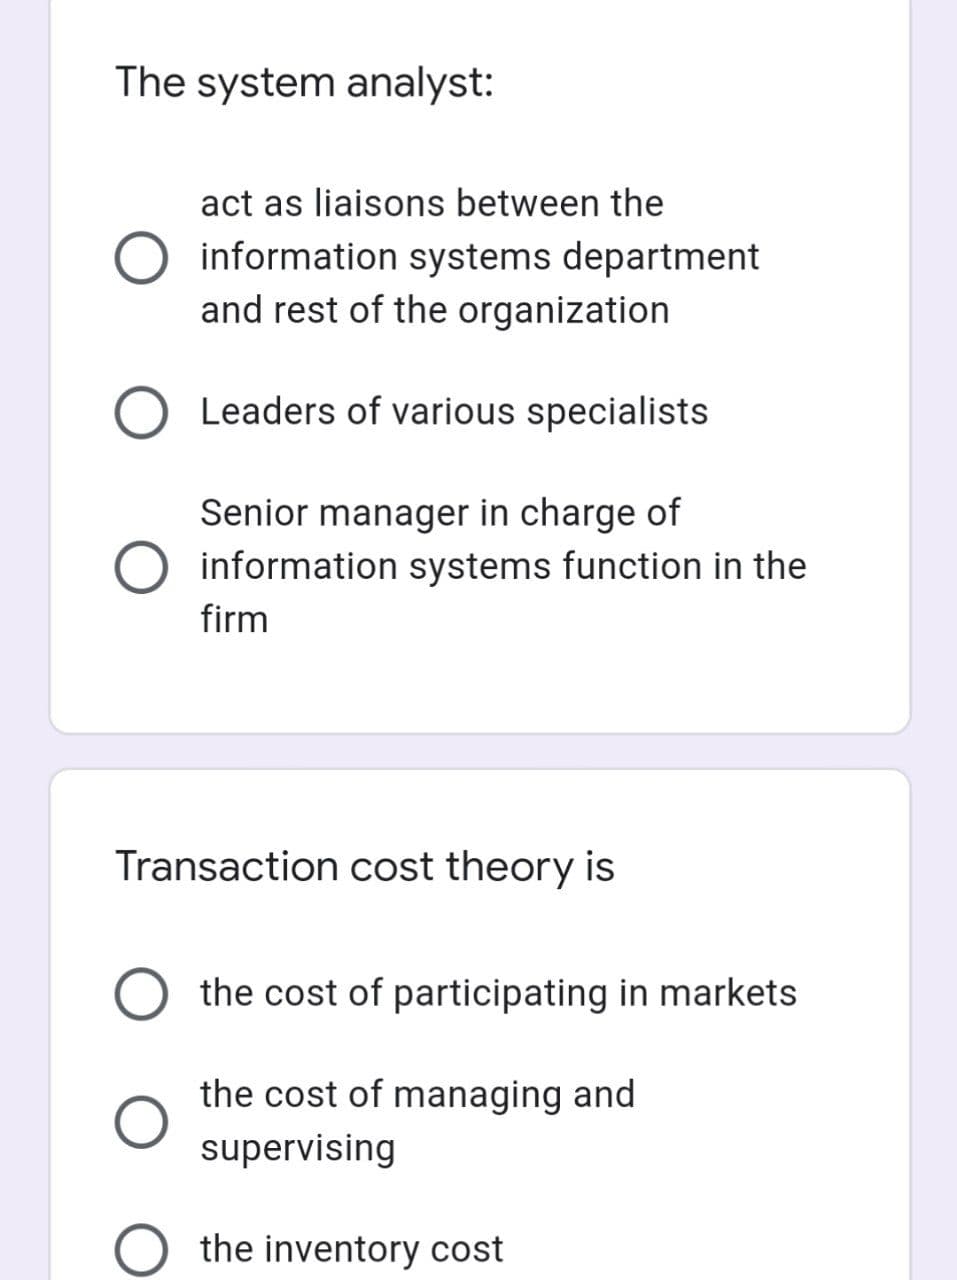 The system analyst:
act as liaisons between the
information systems department
and rest of the organization
O Leaders of various specialists
Senior manager in charge of
O information systems function in the
firm
Transaction cost theory is
the cost of participating in markets
the cost of managing and
supervising
O the inventory cost